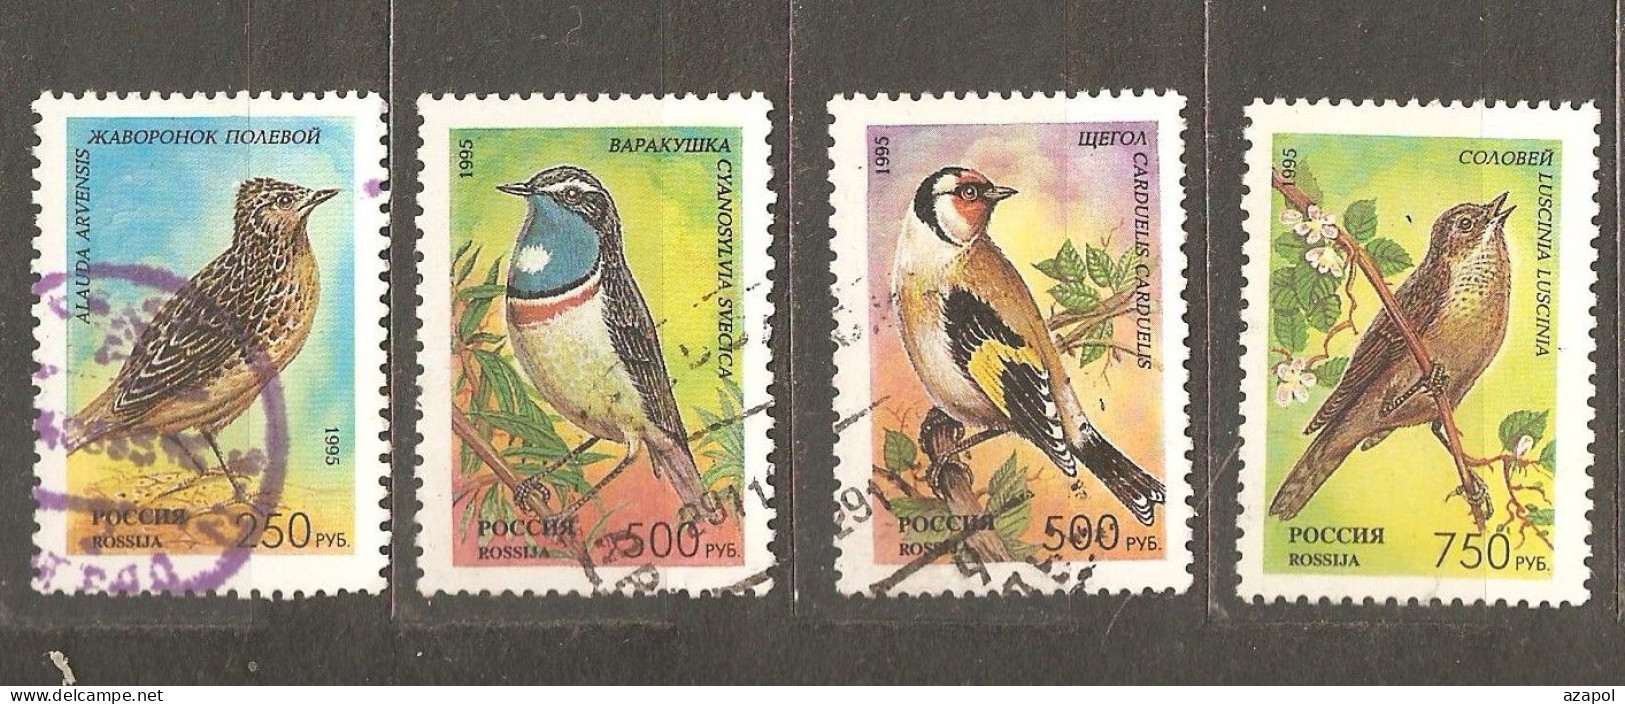 Russia: 4 Used Stamps Of A Set, Songbirds, 1995, Mi#440-4 - Usados